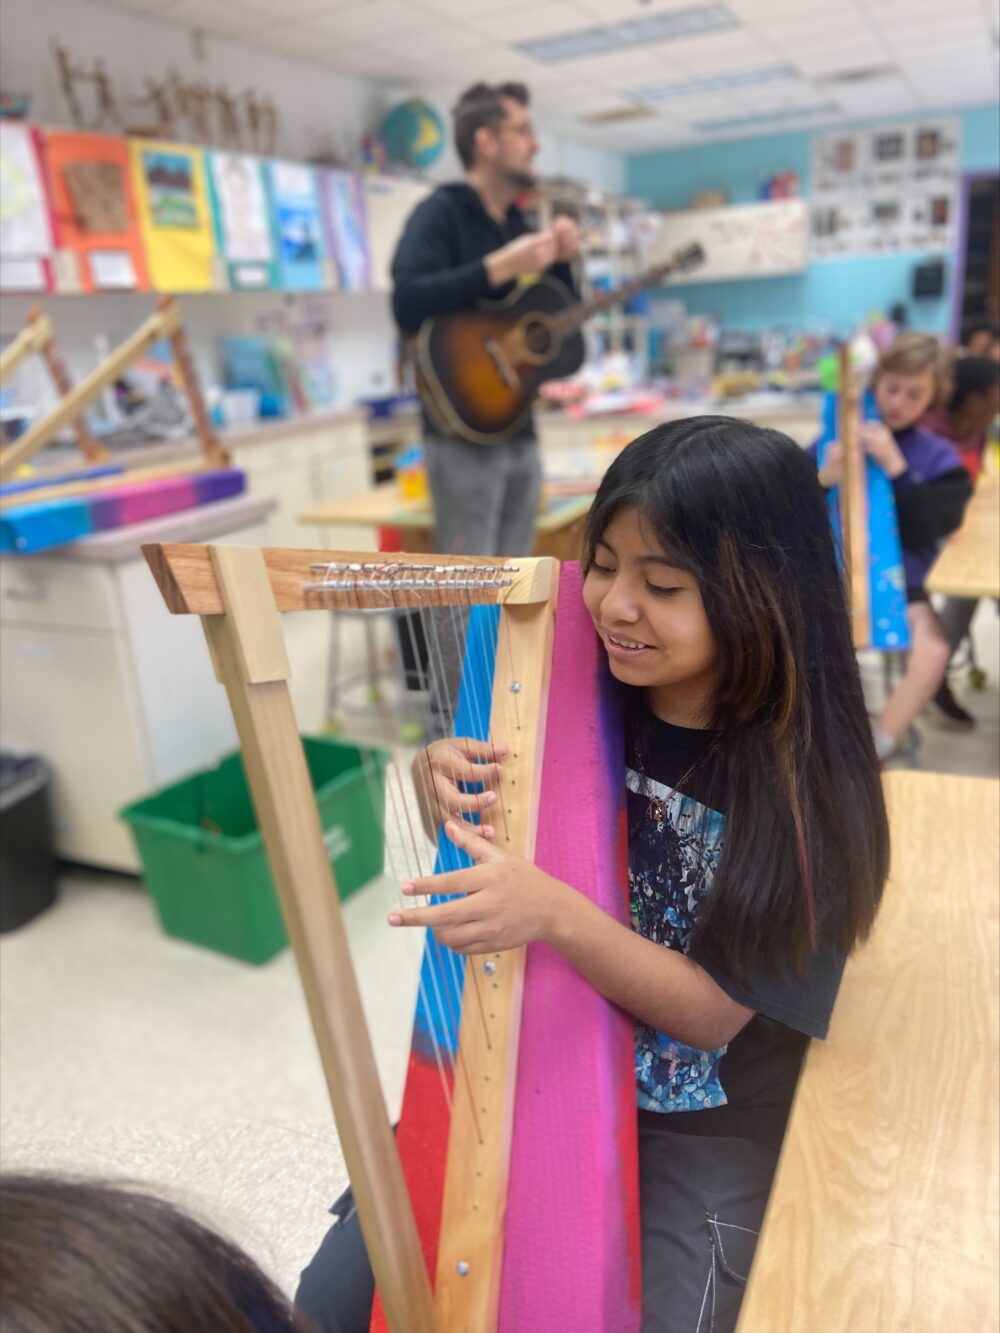 Girl with harp she created at Powell Magnet Elementary